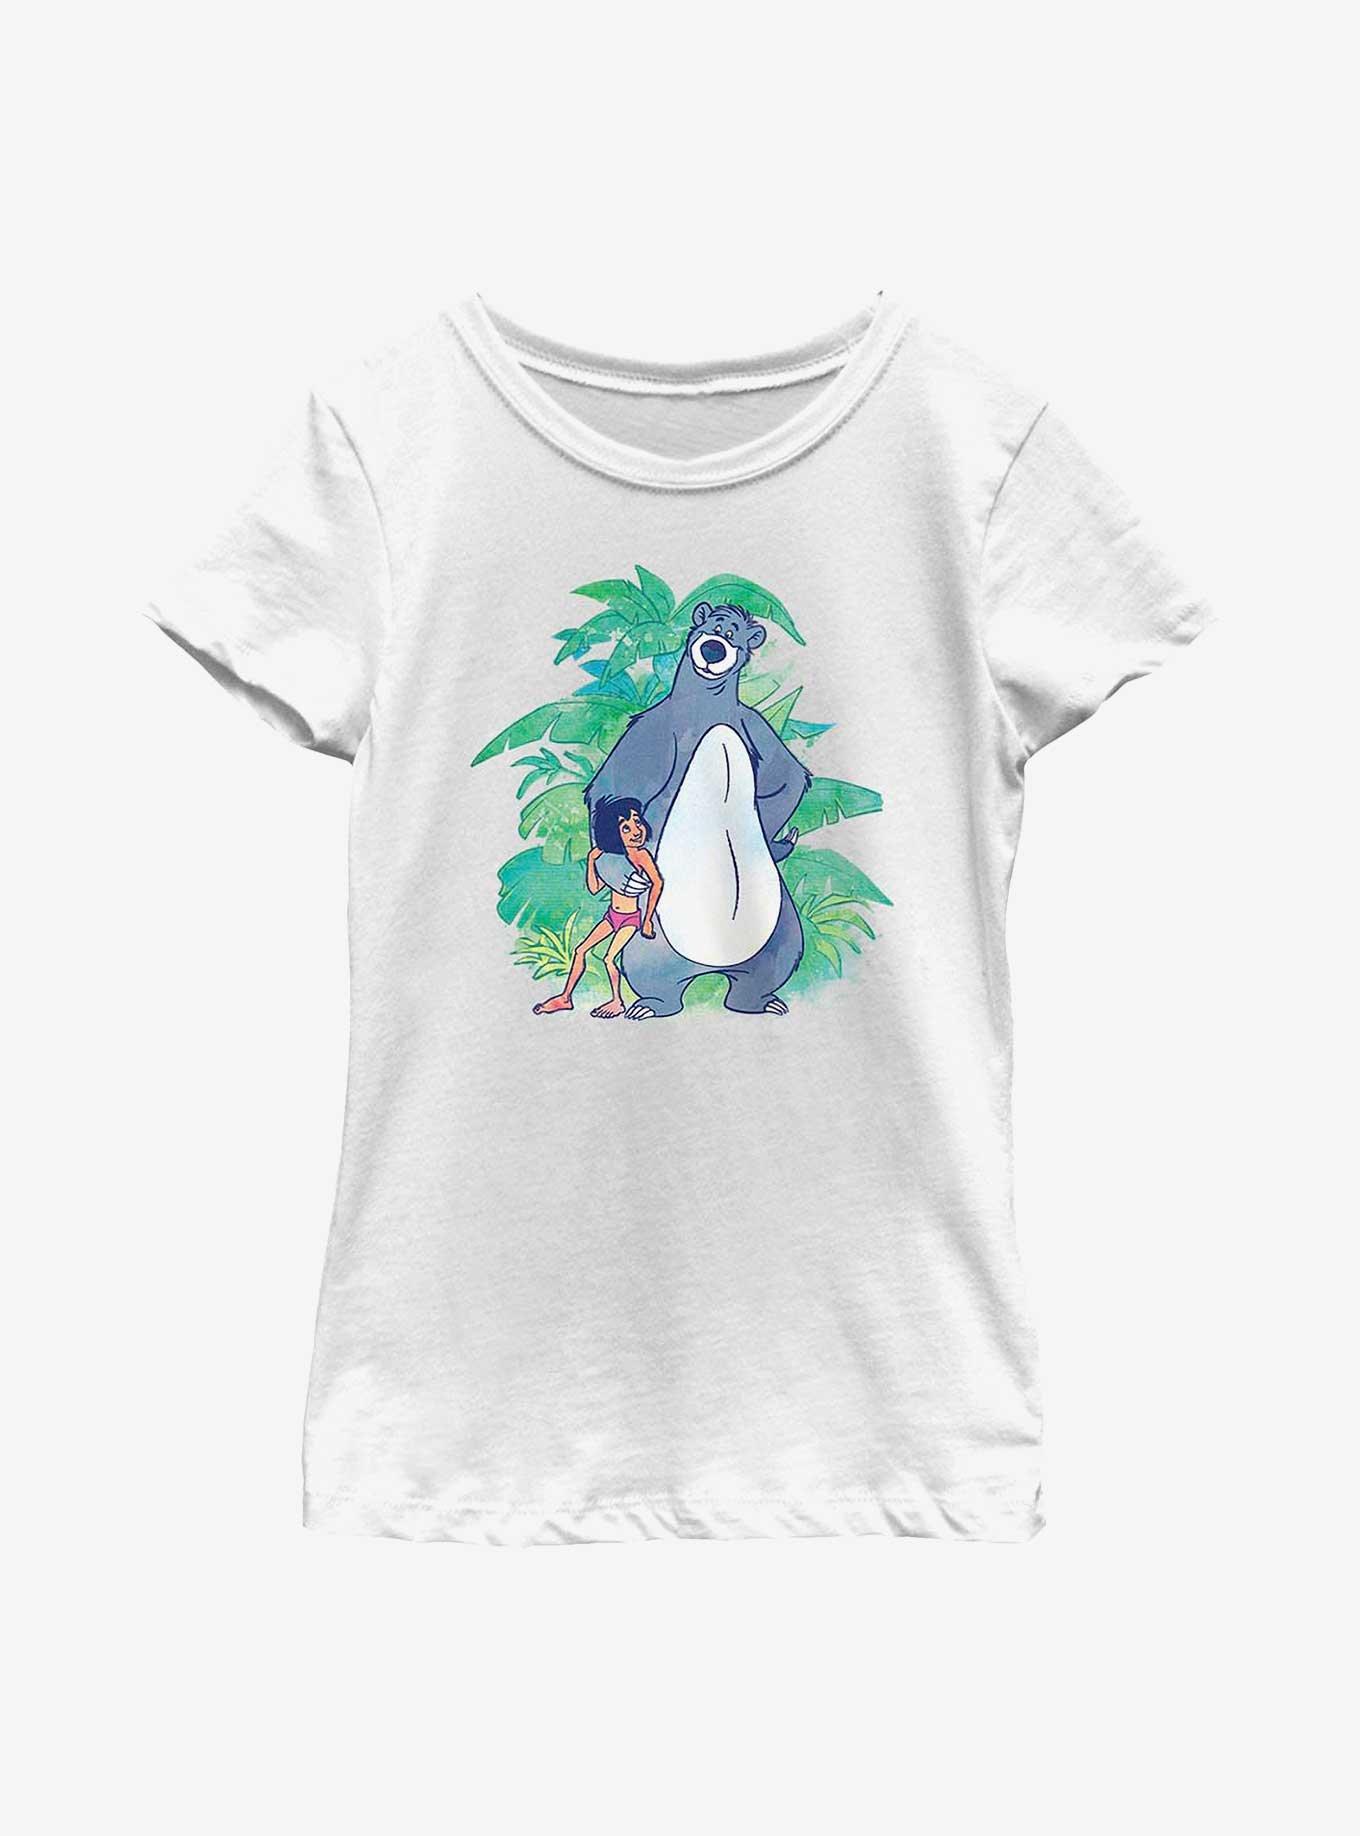 Disney The Jungle Book Jungle Boogie Youth Girls T-Shirt, WHITE, hi-res